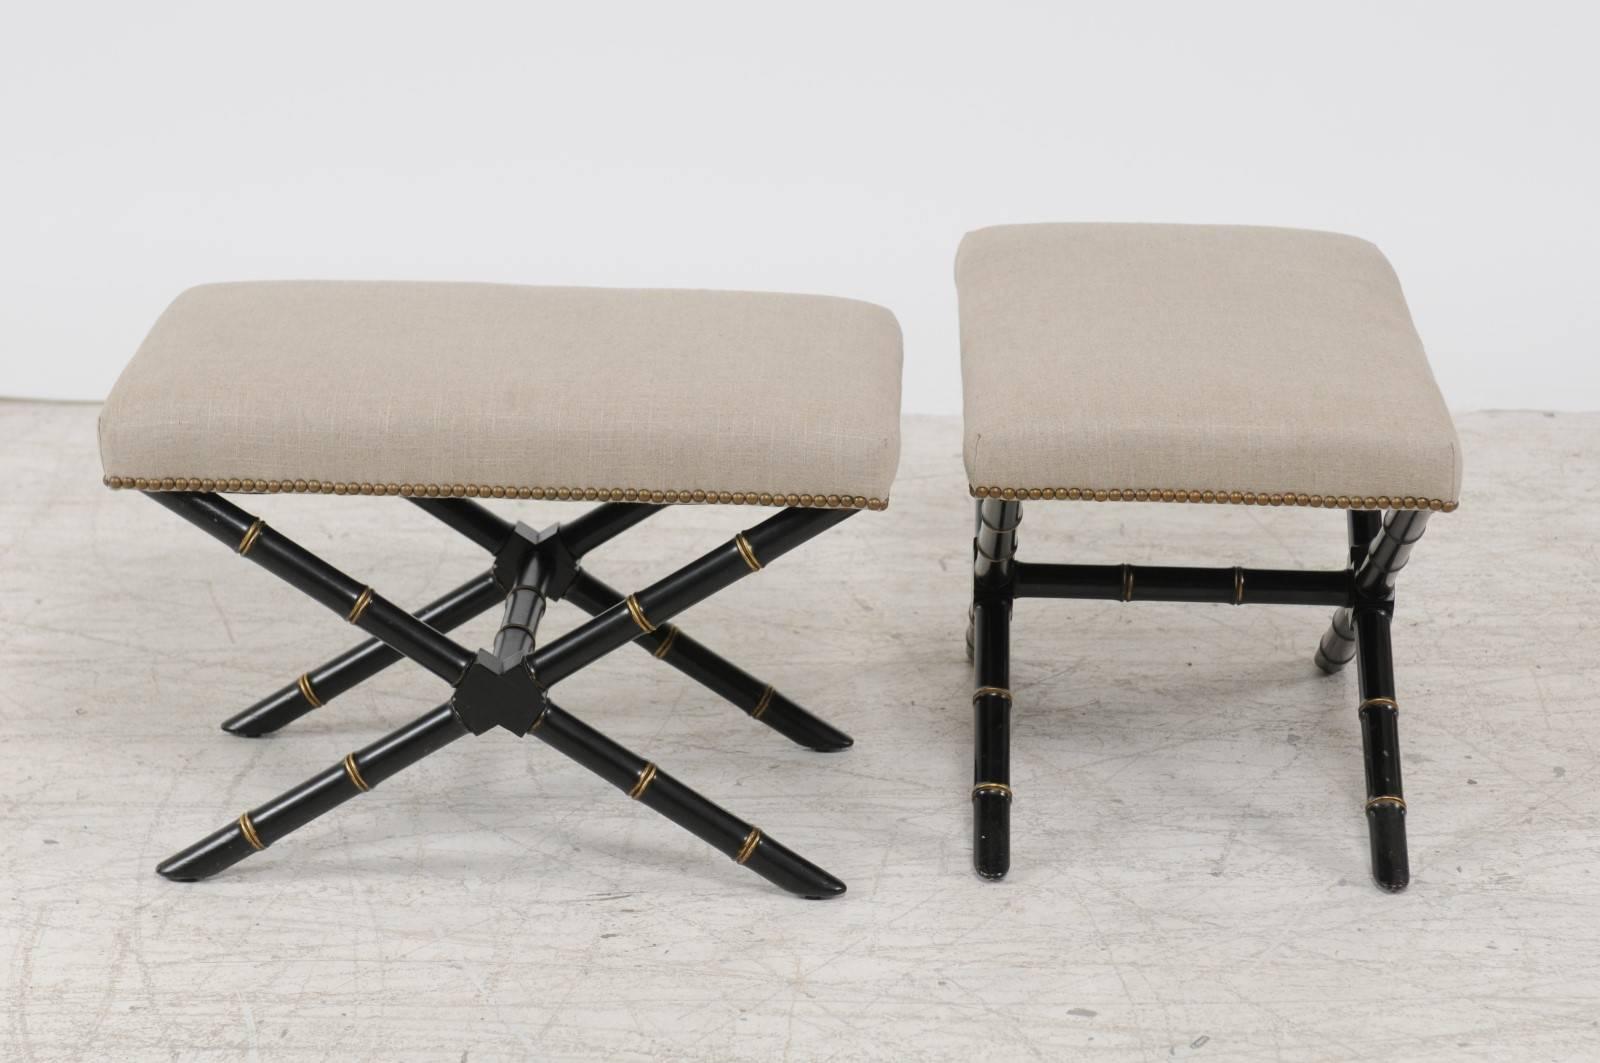 20th Century Pair of French Ebonized and Gilded Faux-Bamboo X-Form Stools, circa 1950